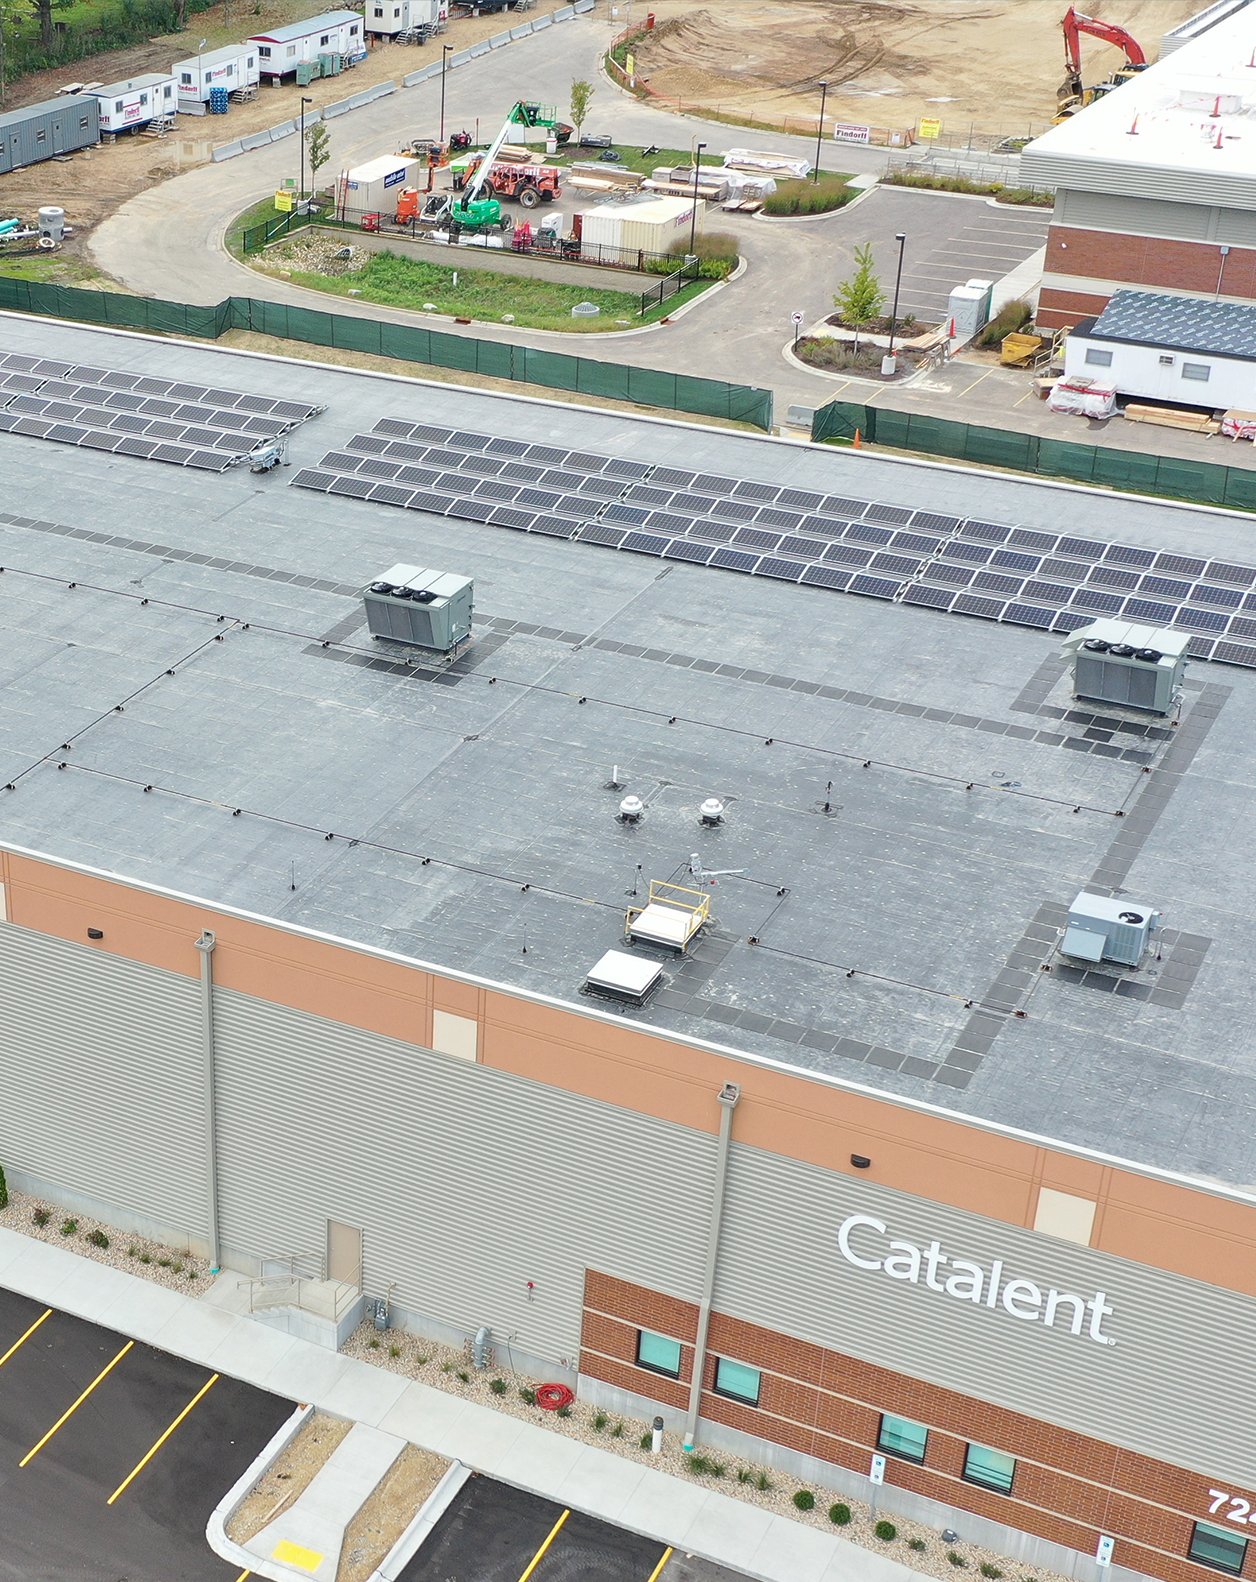 Catalent had SunPeak build a roof-mounted solar PV system